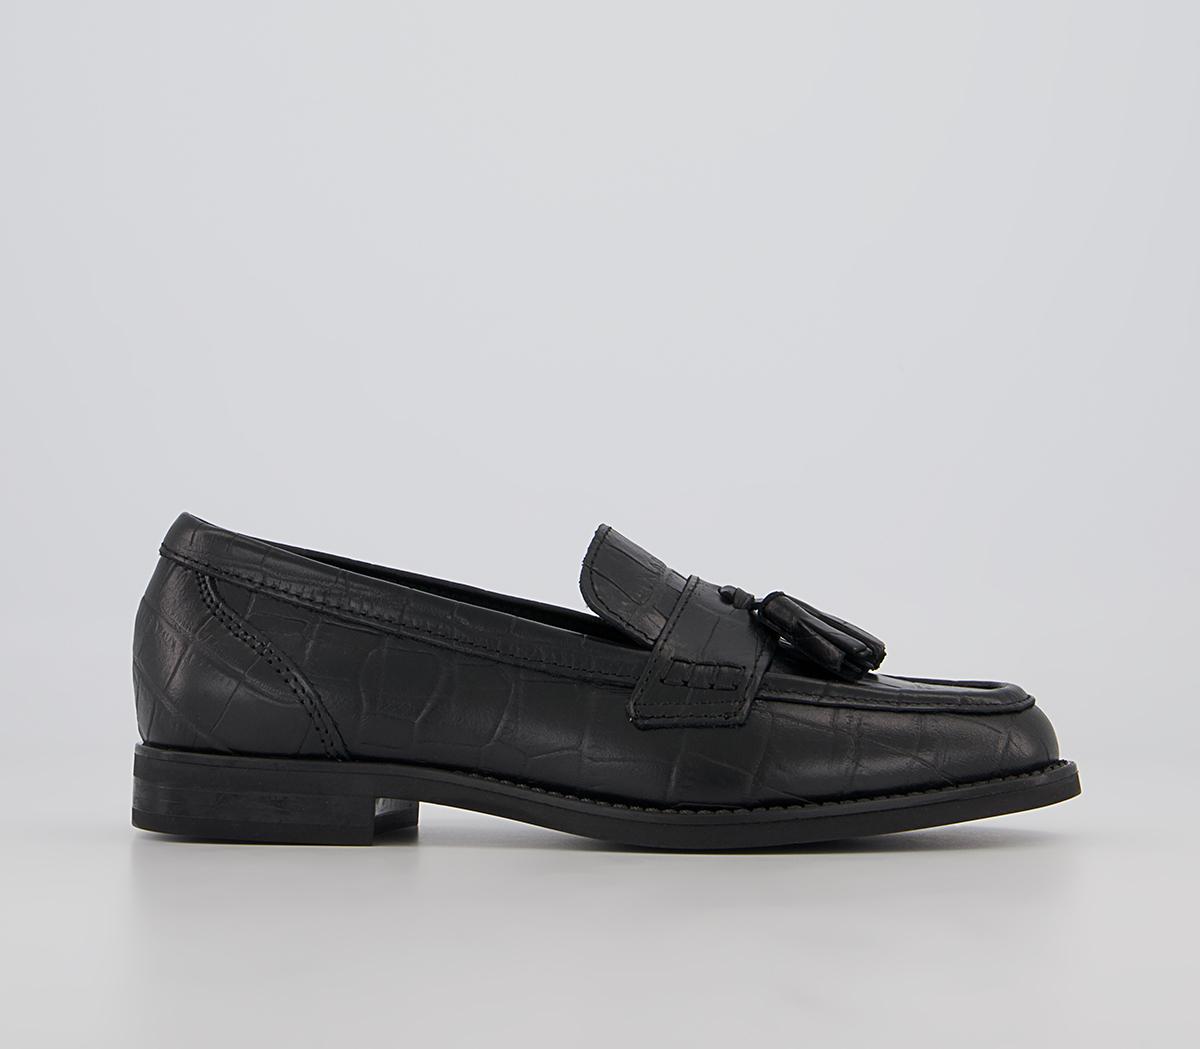 OFFICE Foundation Tassel Loafers Black Croc Leather - OFFICE Girl